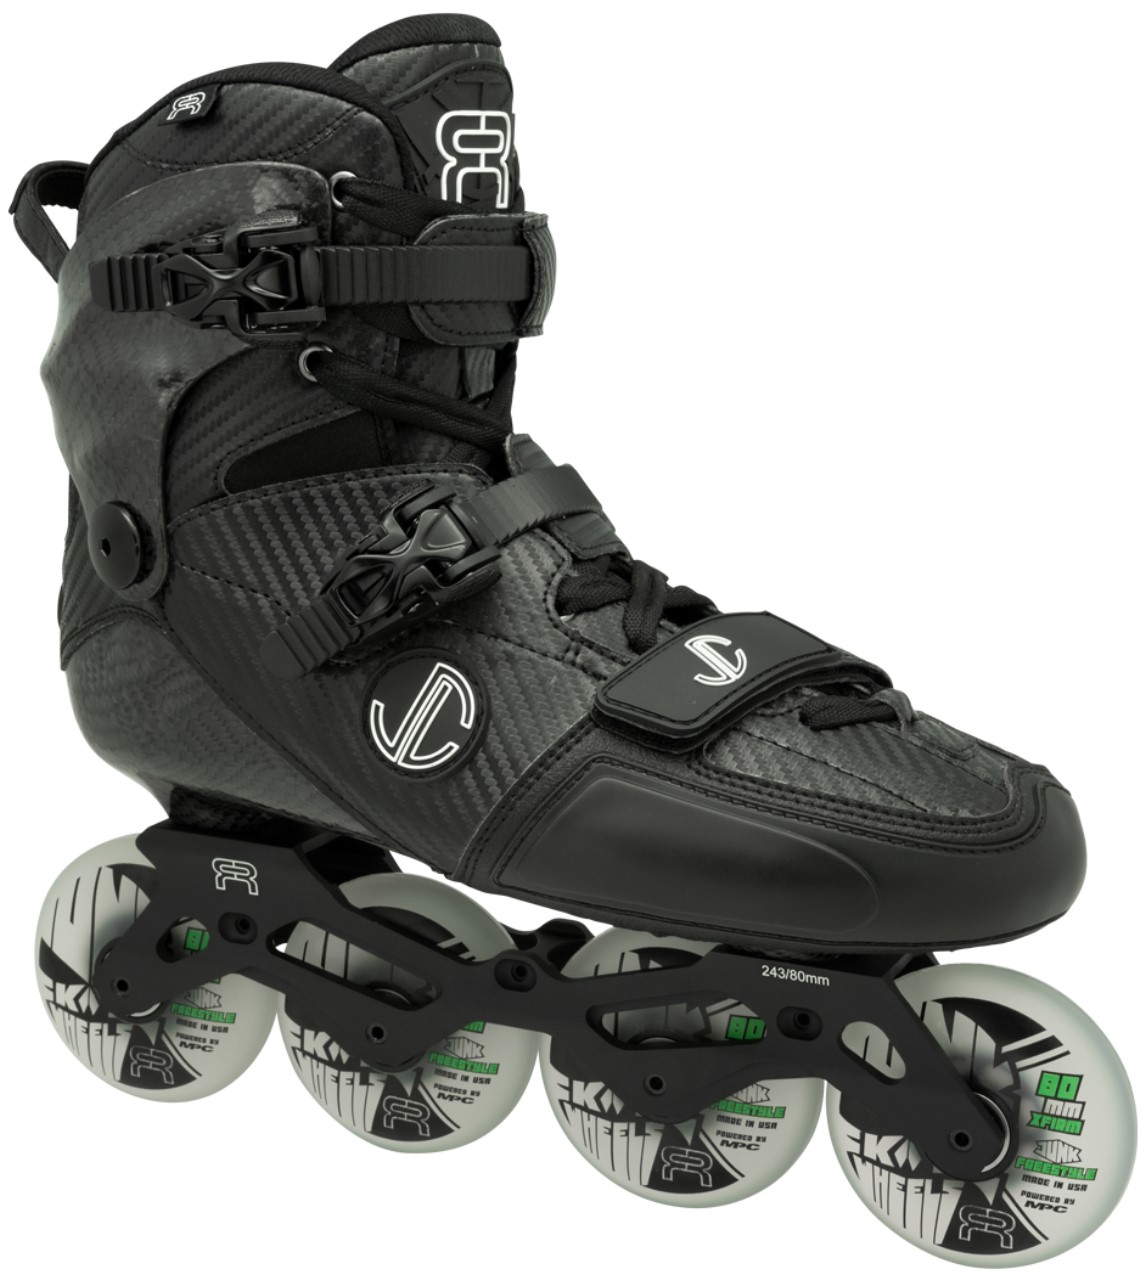 FR SL 80 Flat inline skate model 2021 for freestyle slalom with carbon boot and carbon cuff and flat V3 Deluxe frame